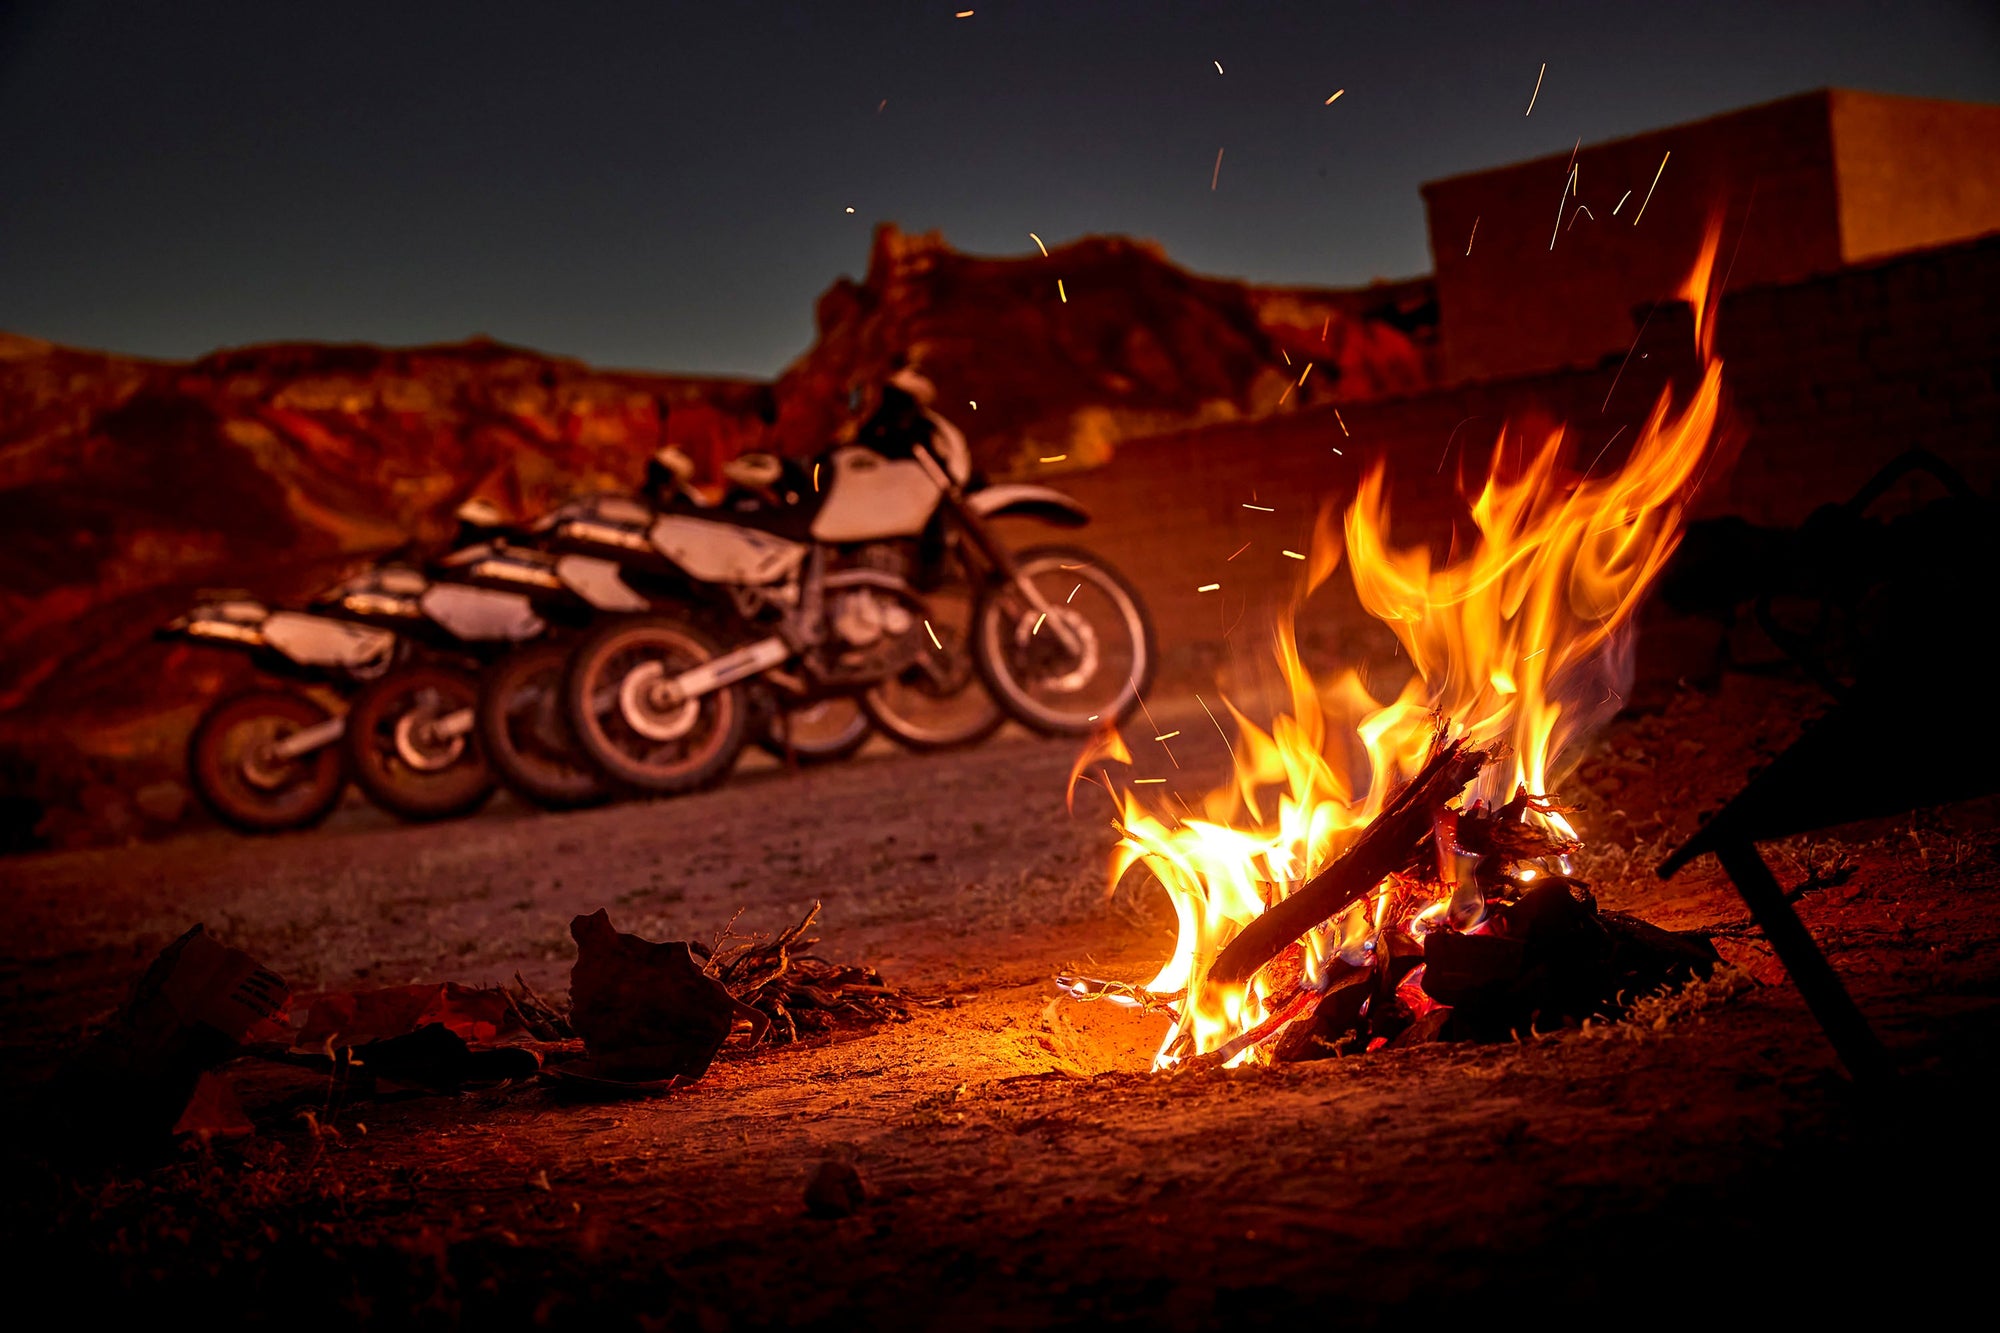 DR650 lit by campfire